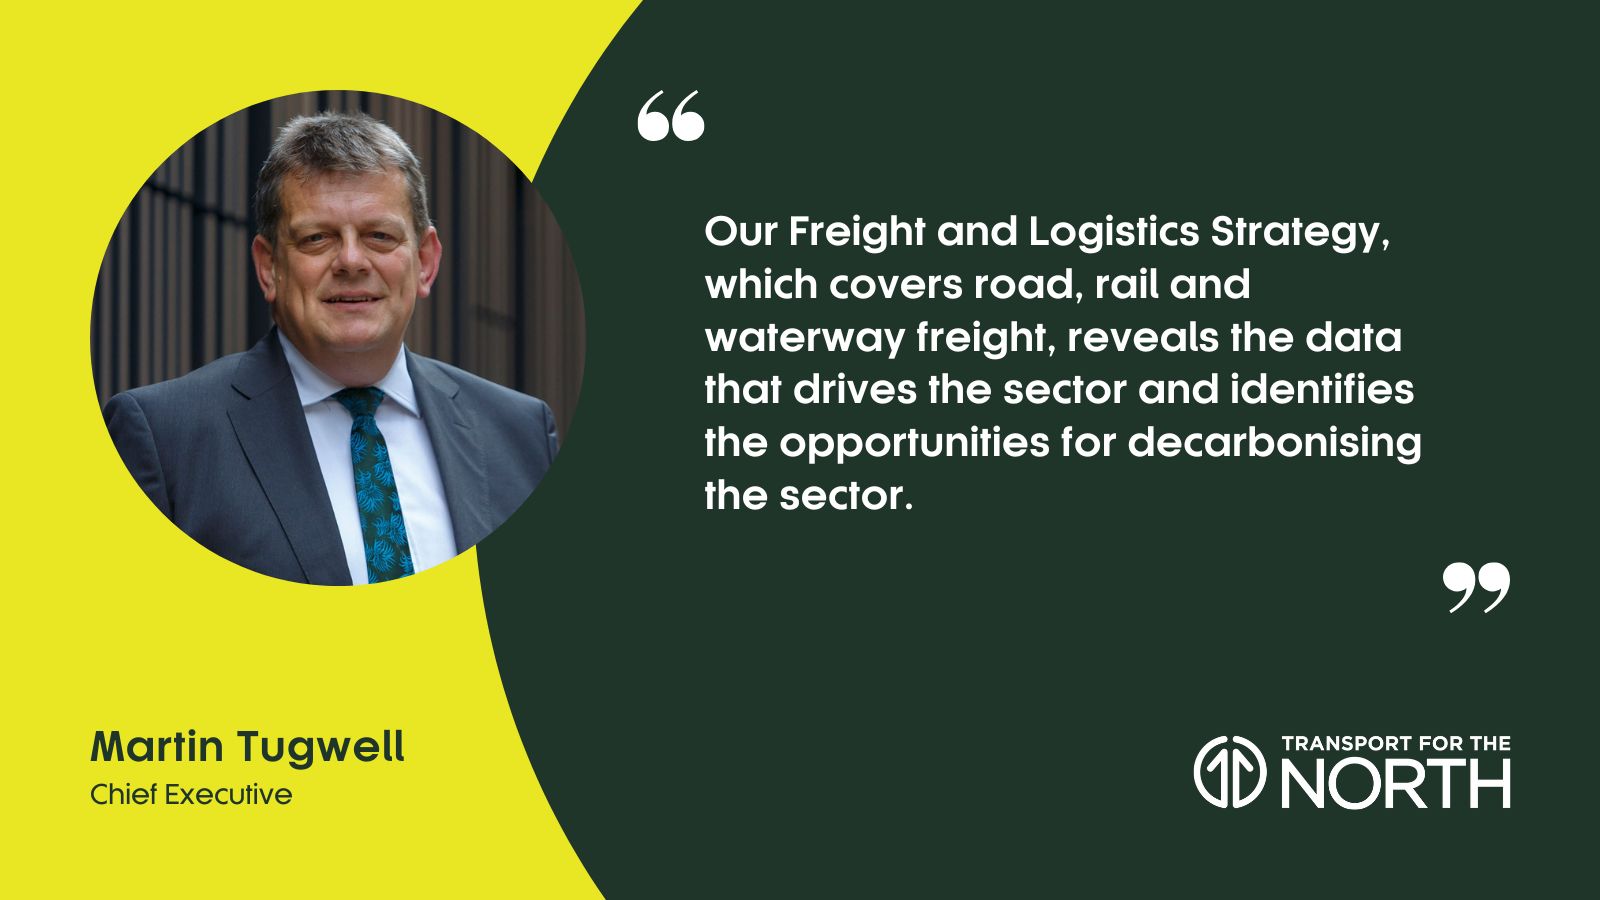 Martin Tugwell on TfN's Freight and Logistics strategy